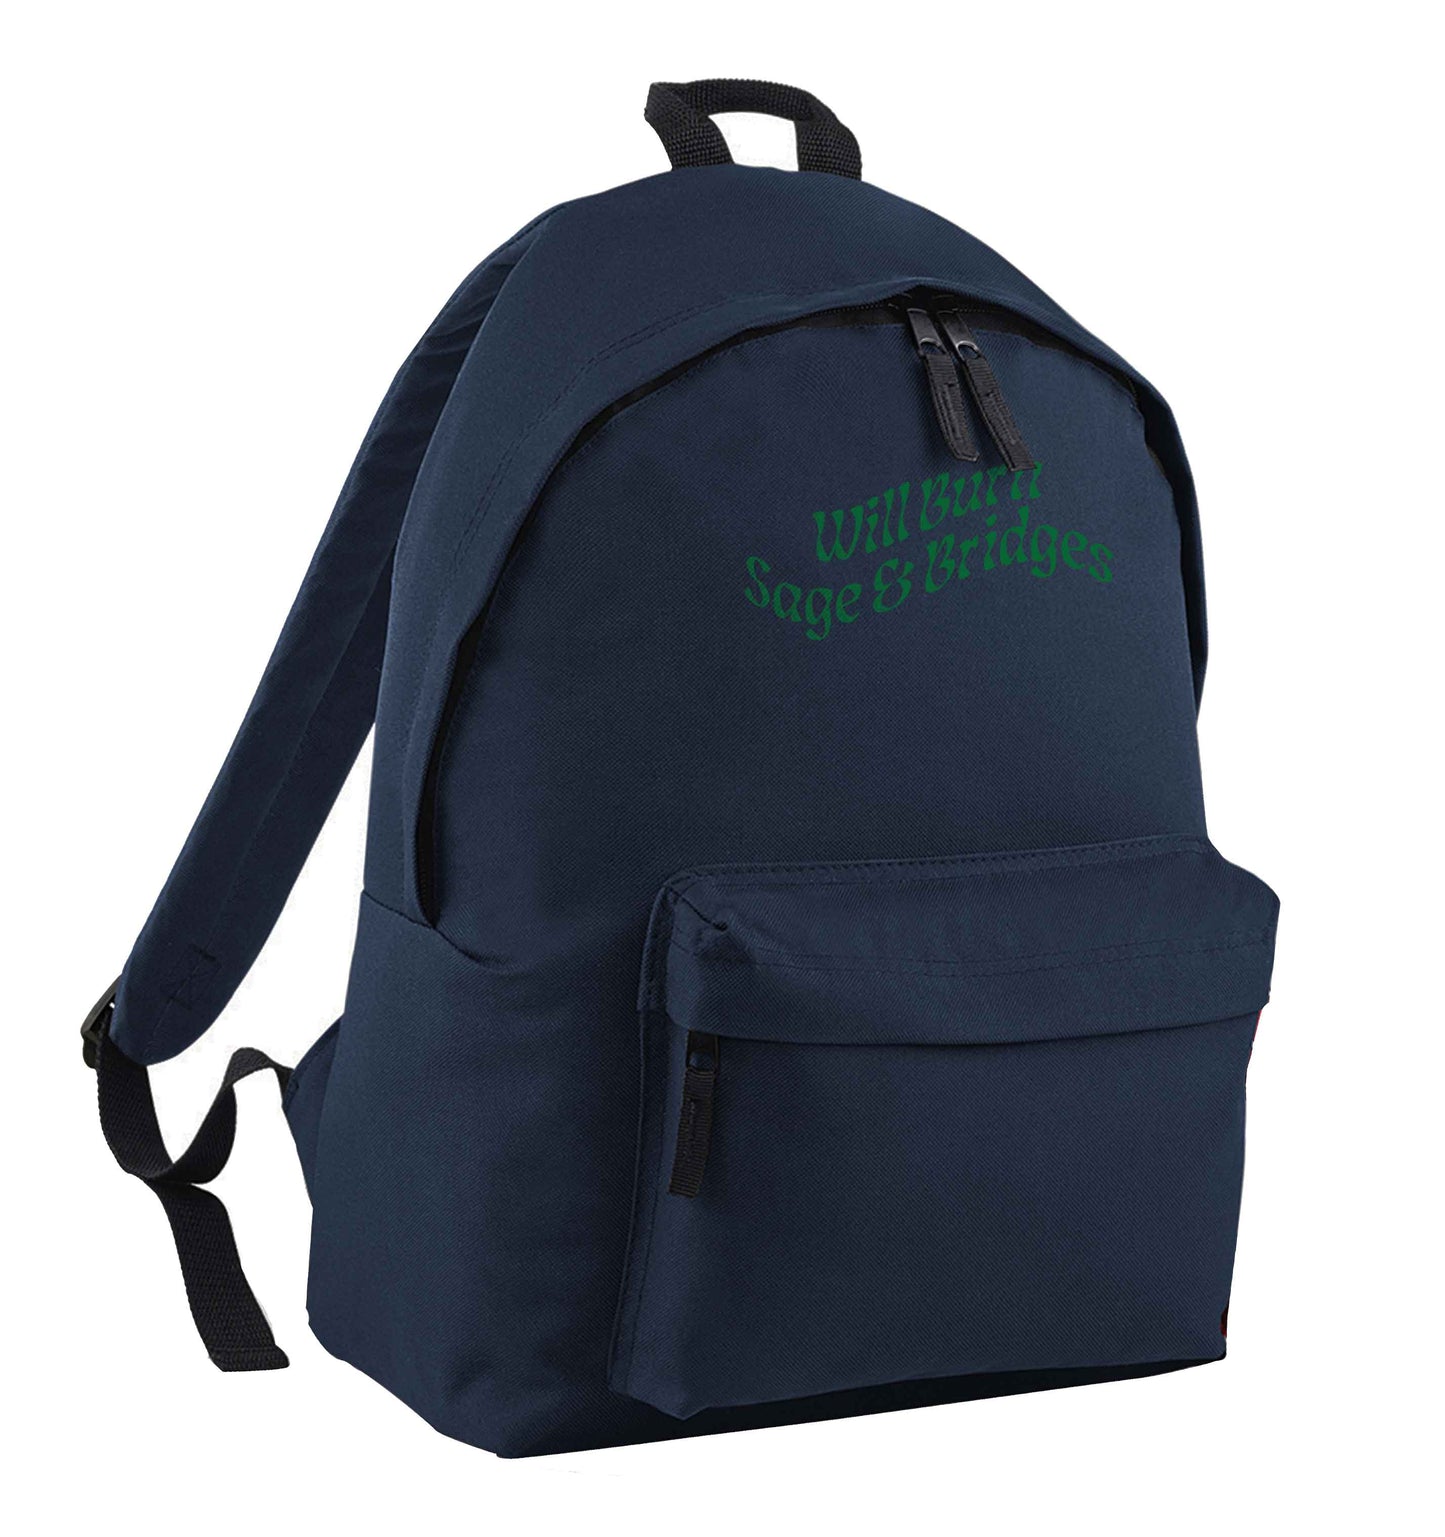 Will burn bridges and sage navy adults backpack